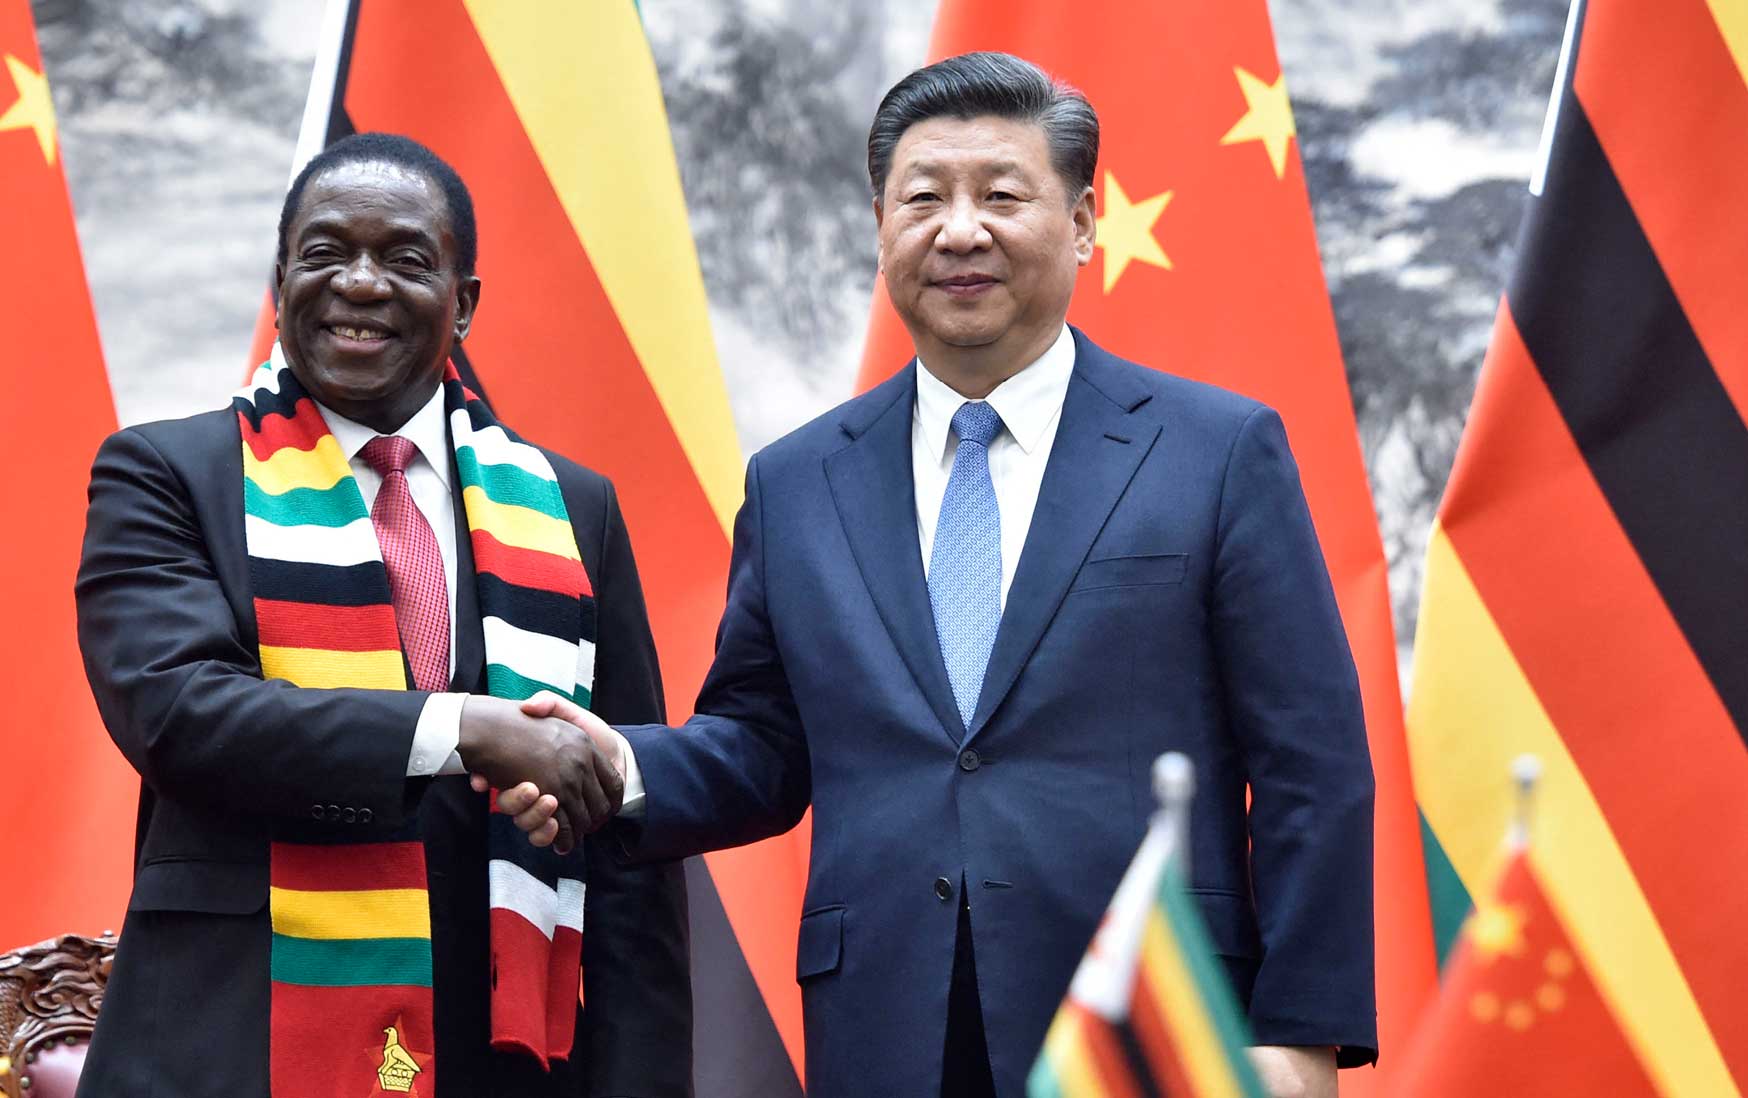 President Emmerson Mnangagwa shakes hands with Chinese President Xi Jinping